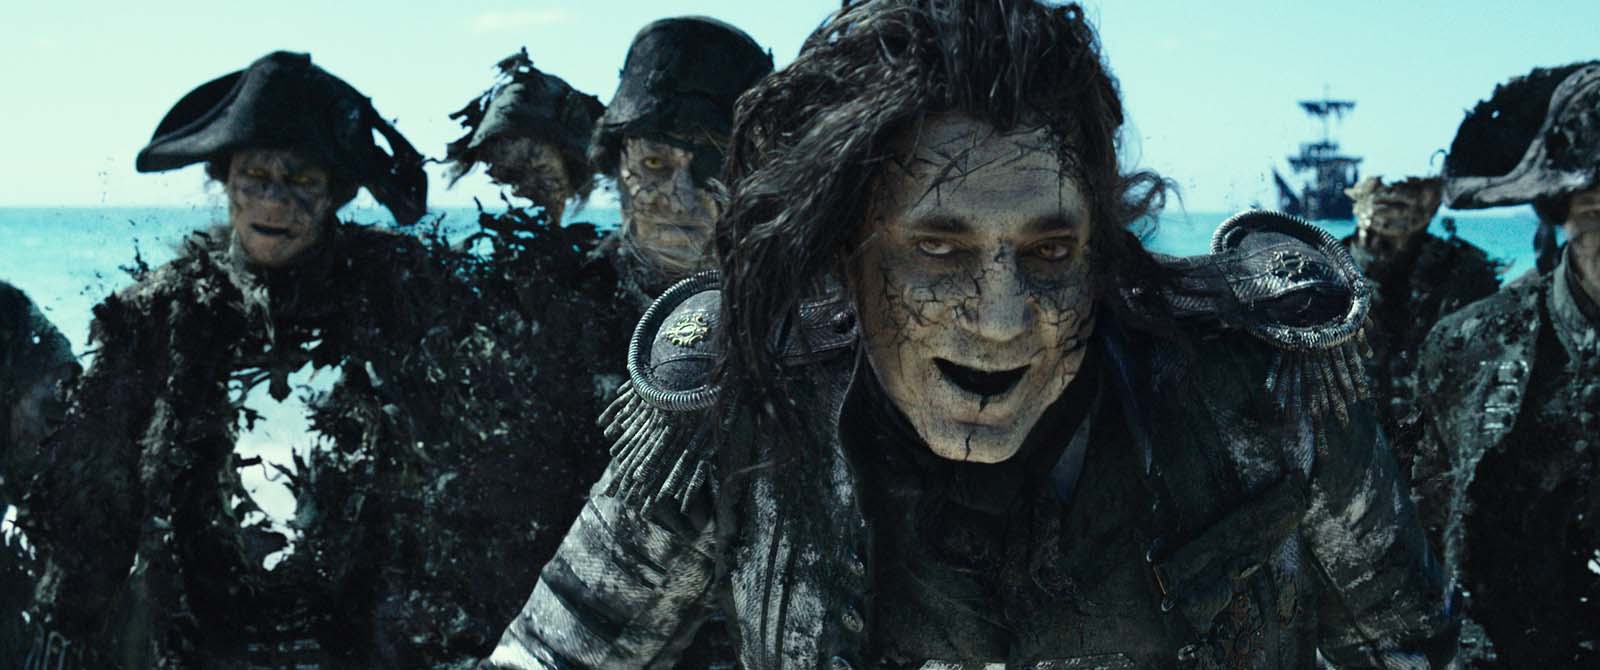 PIRATES OF THE CARIBBEAN: DEAD MEN TELL NO TALES